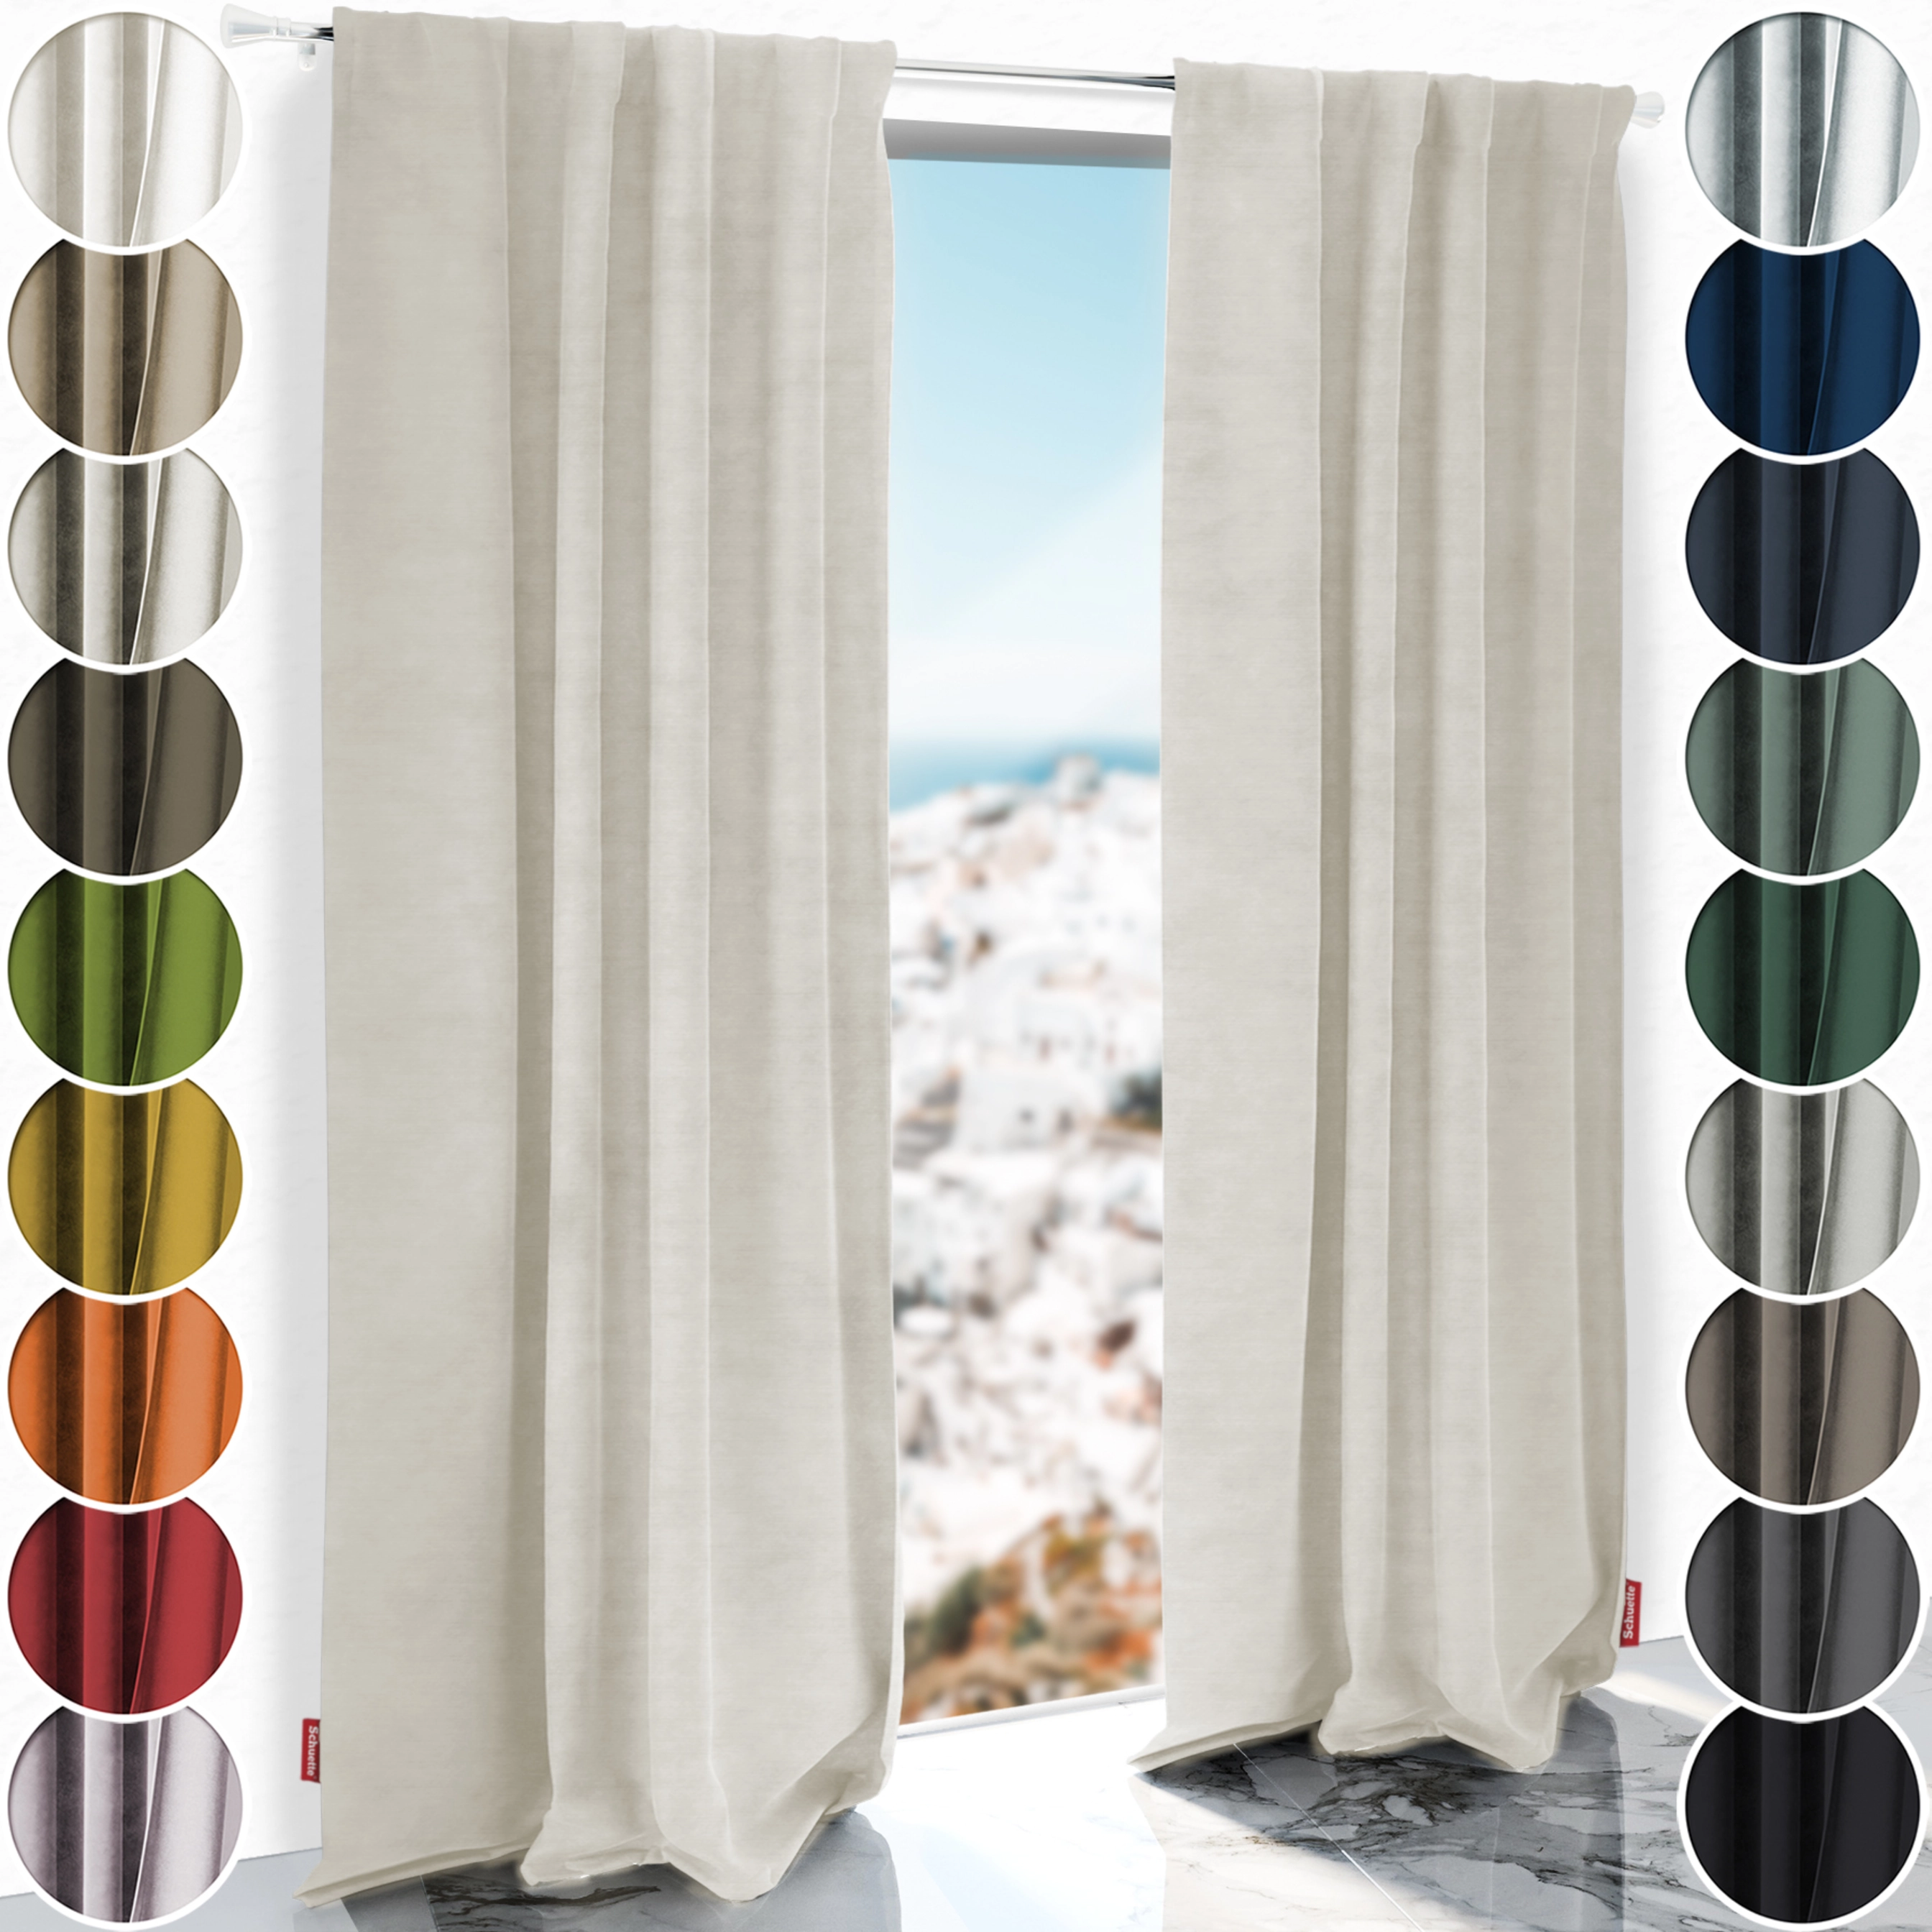 Schuette® Blackout Curtain with Tunnelband ● Millenium Velvet Collection: Polar Bear (White-Beige) ● 1 piece ● Crease-resistant Easy-care Thermo Opaque & Strongly Darkening